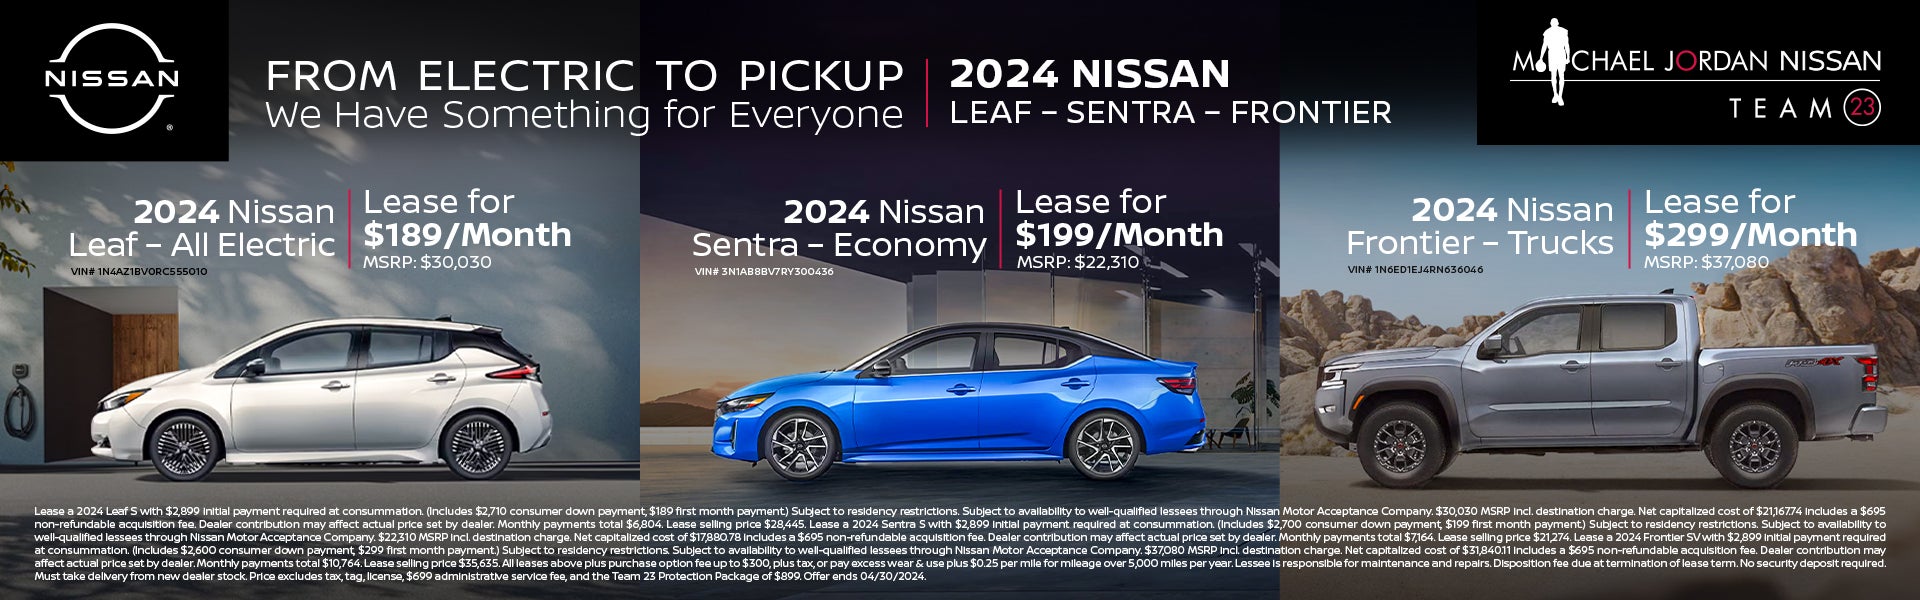 Lease a Leaf - Sentra - or Frontier!